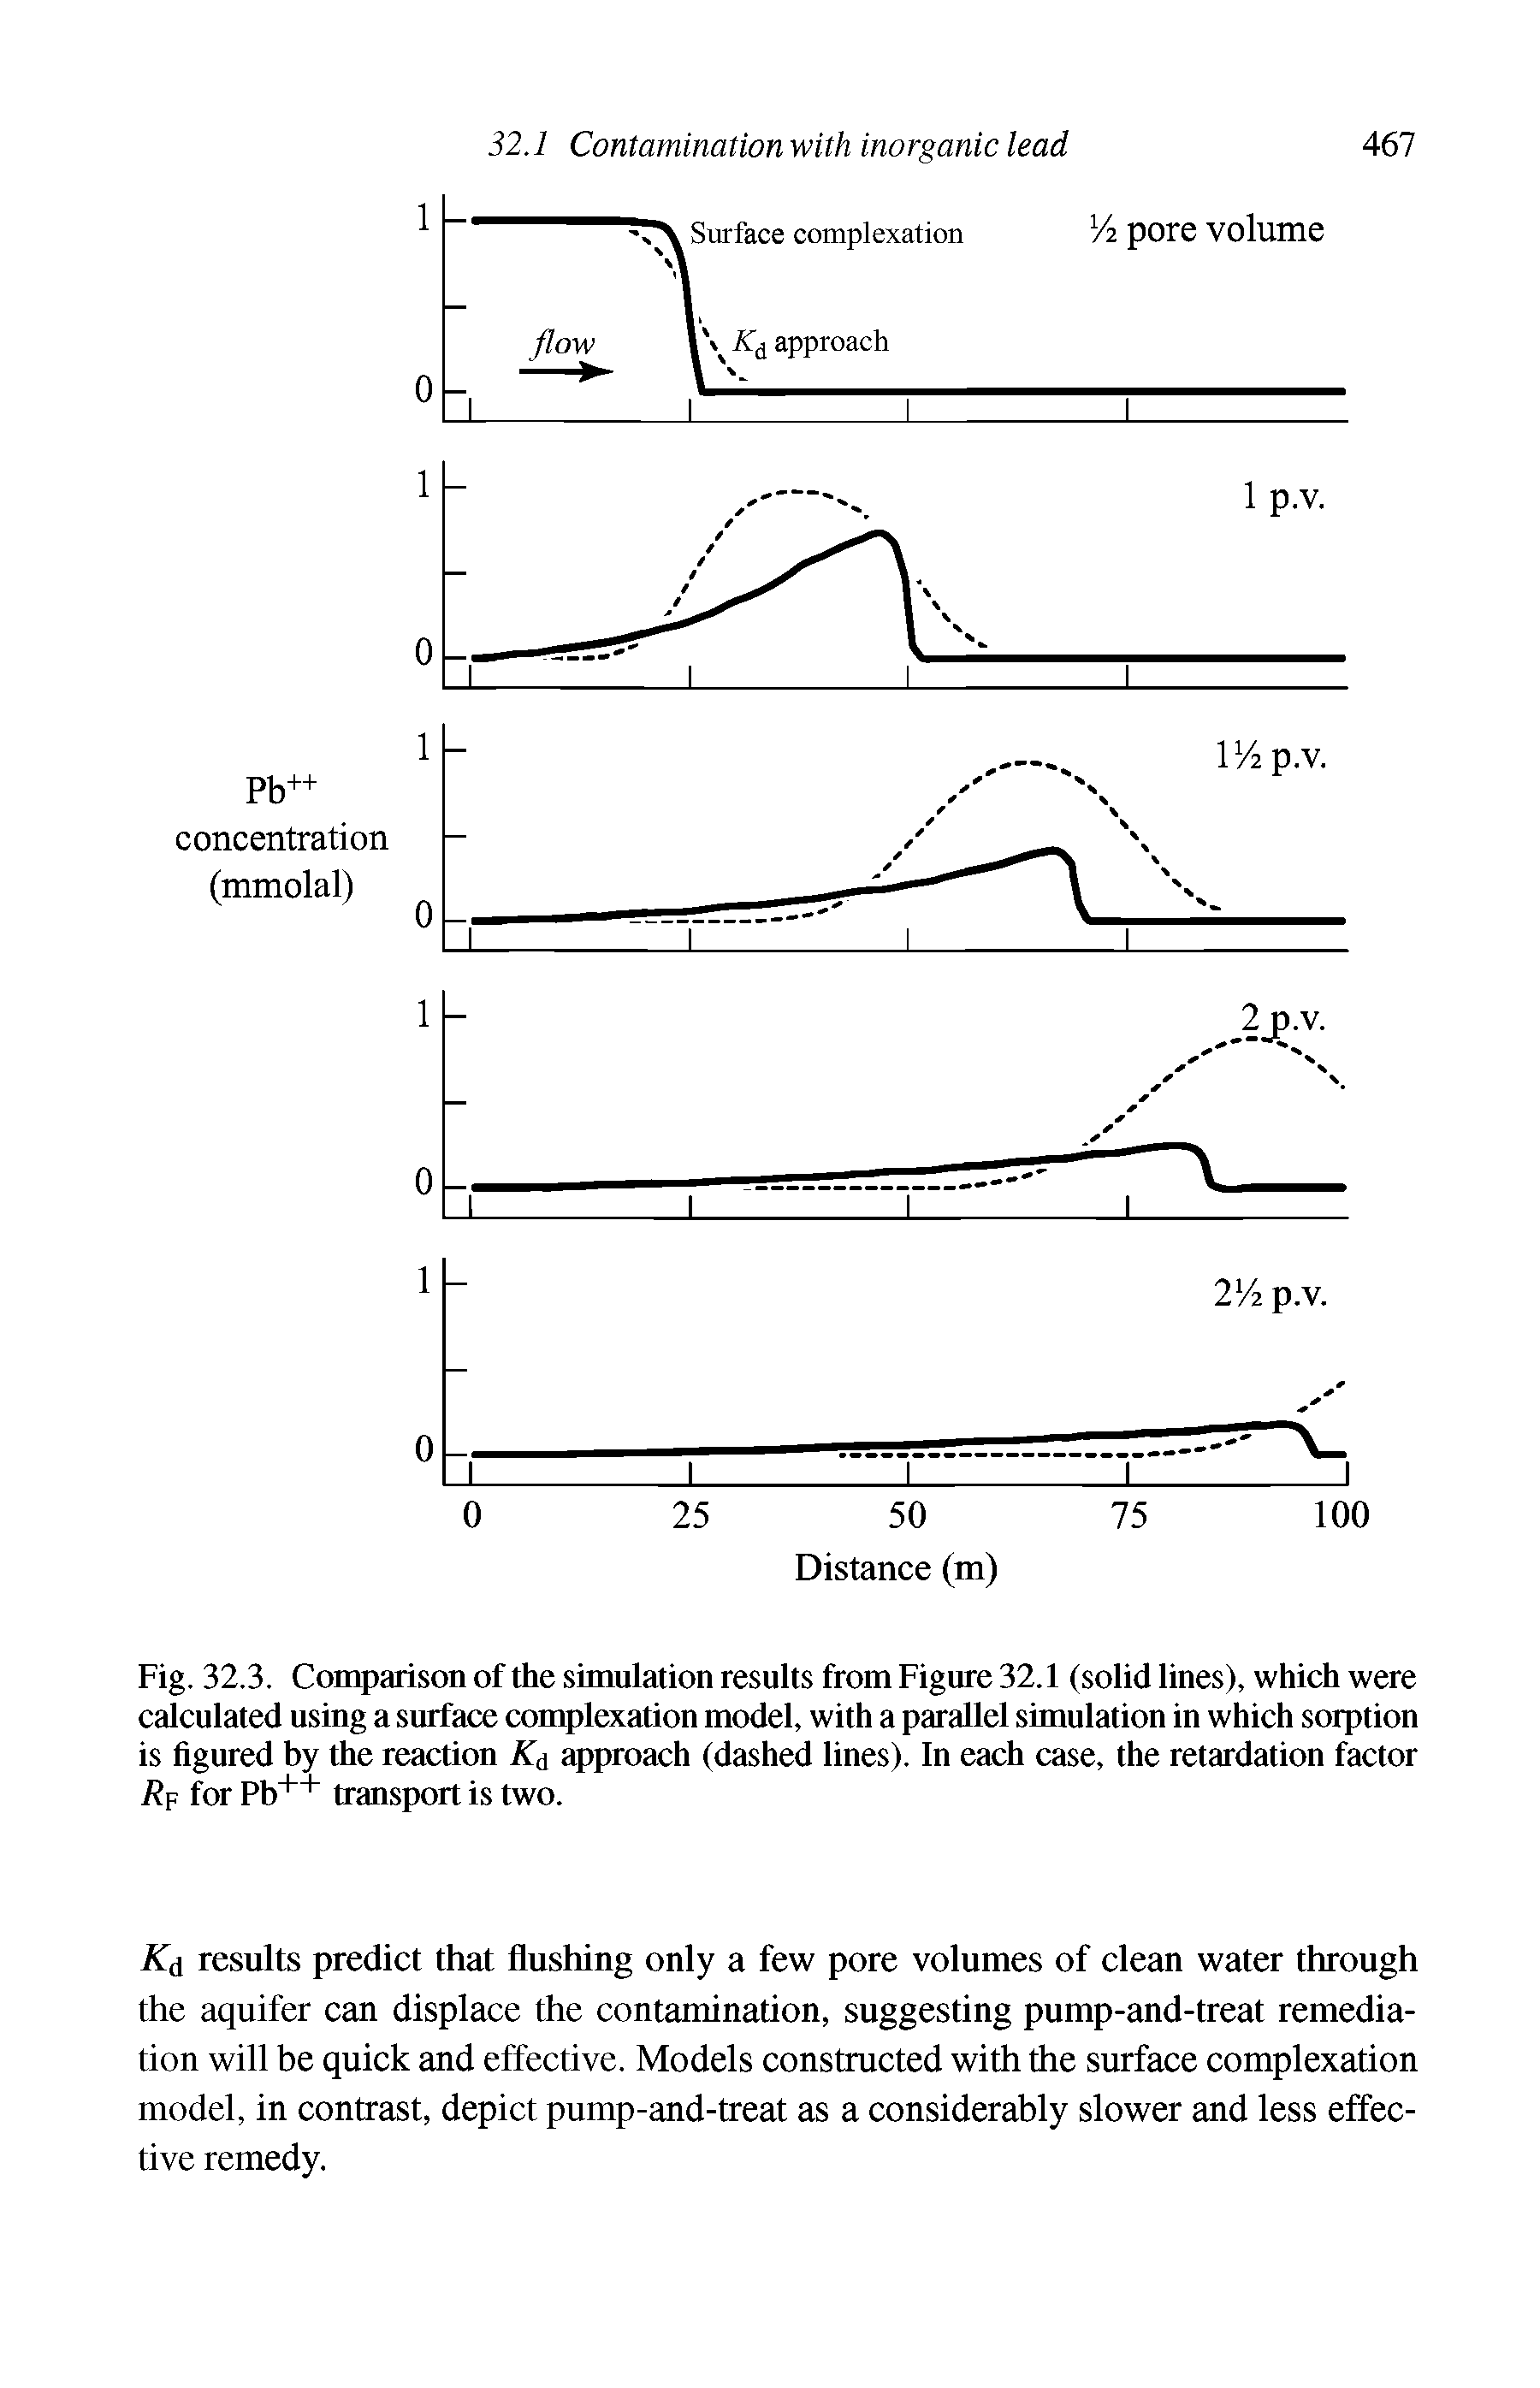 Fig. 32.3. Comparison of the simulation results from Figure 32.1 (solid lines), which were calculated using a surface complexation model, with a parallel simulation in which sorption is figured by the reaction Kd approach (dashed lines). In each case, the retardation factor Rf for Pb++ transport is two.